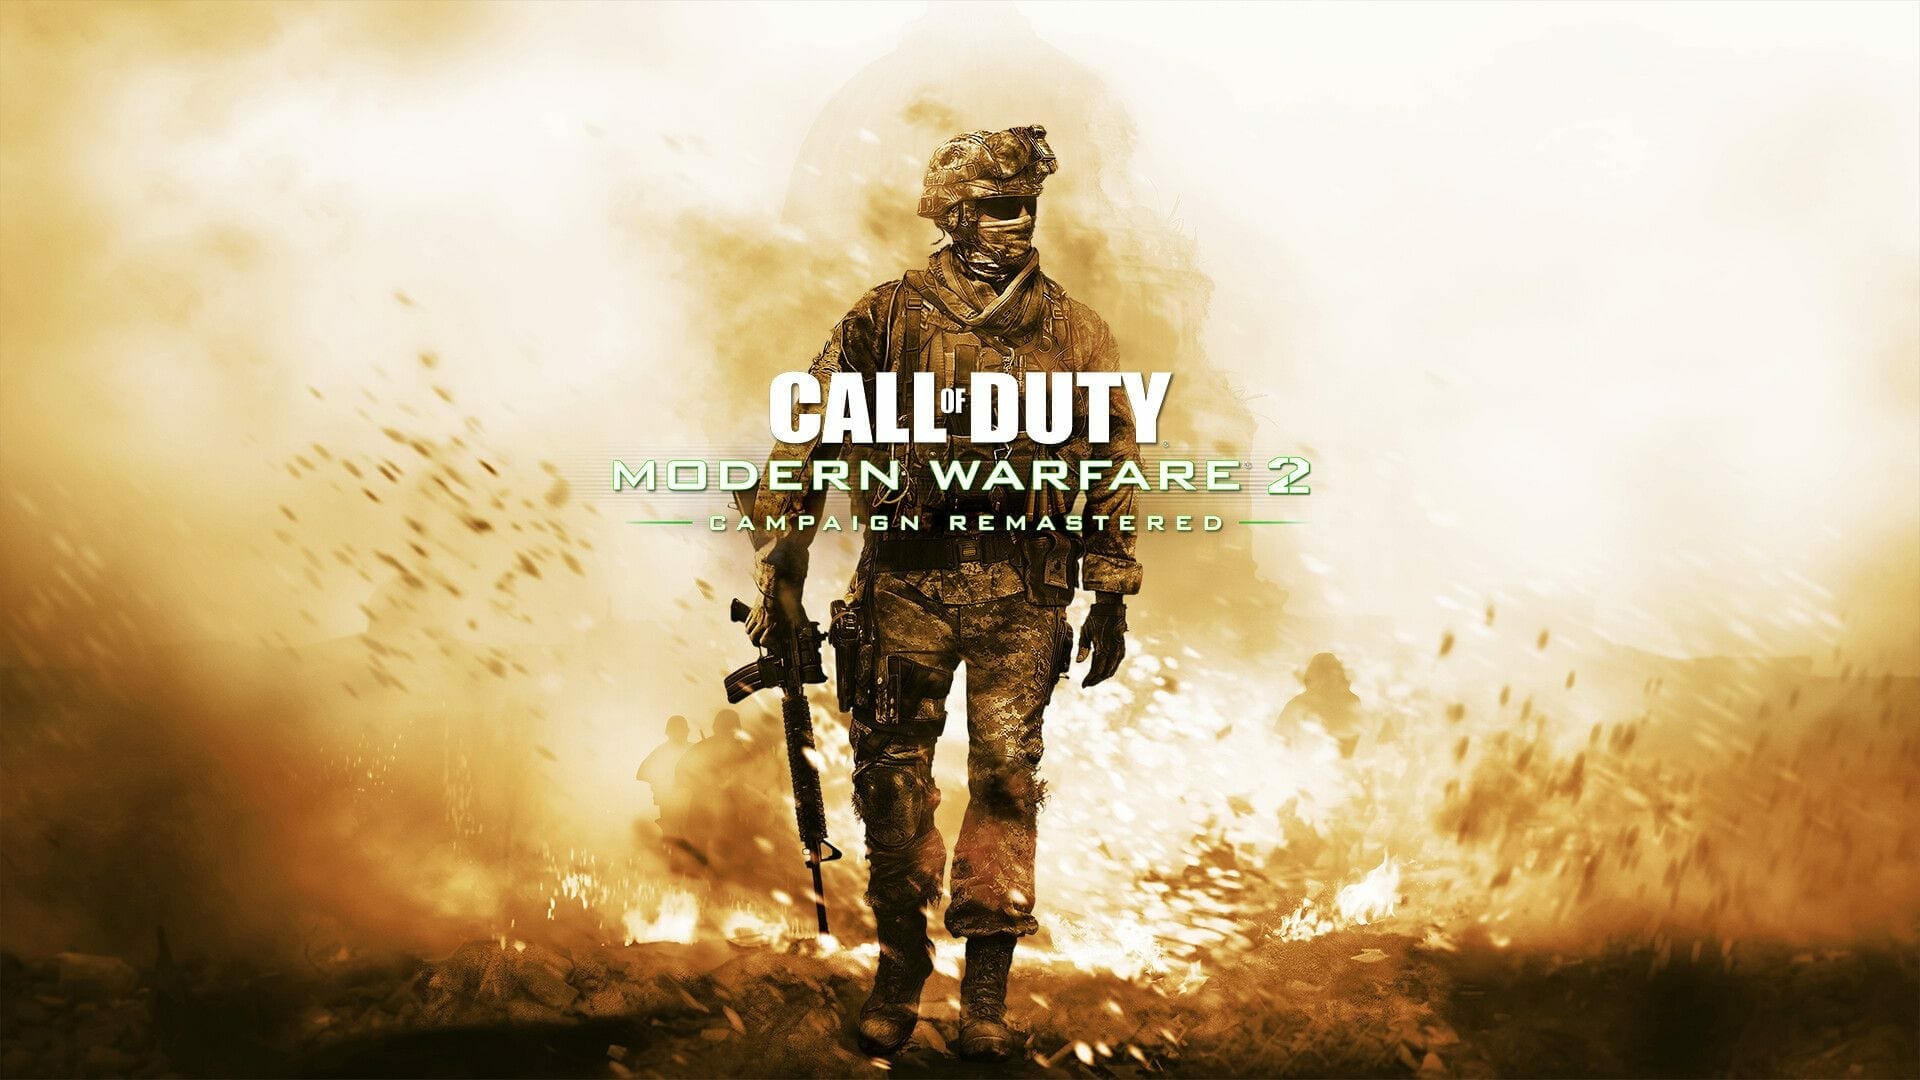 Updated Crack v 3 (Extern) Call of Duty Modern Warfare 2 Campaign  Remastered This crack fixes..